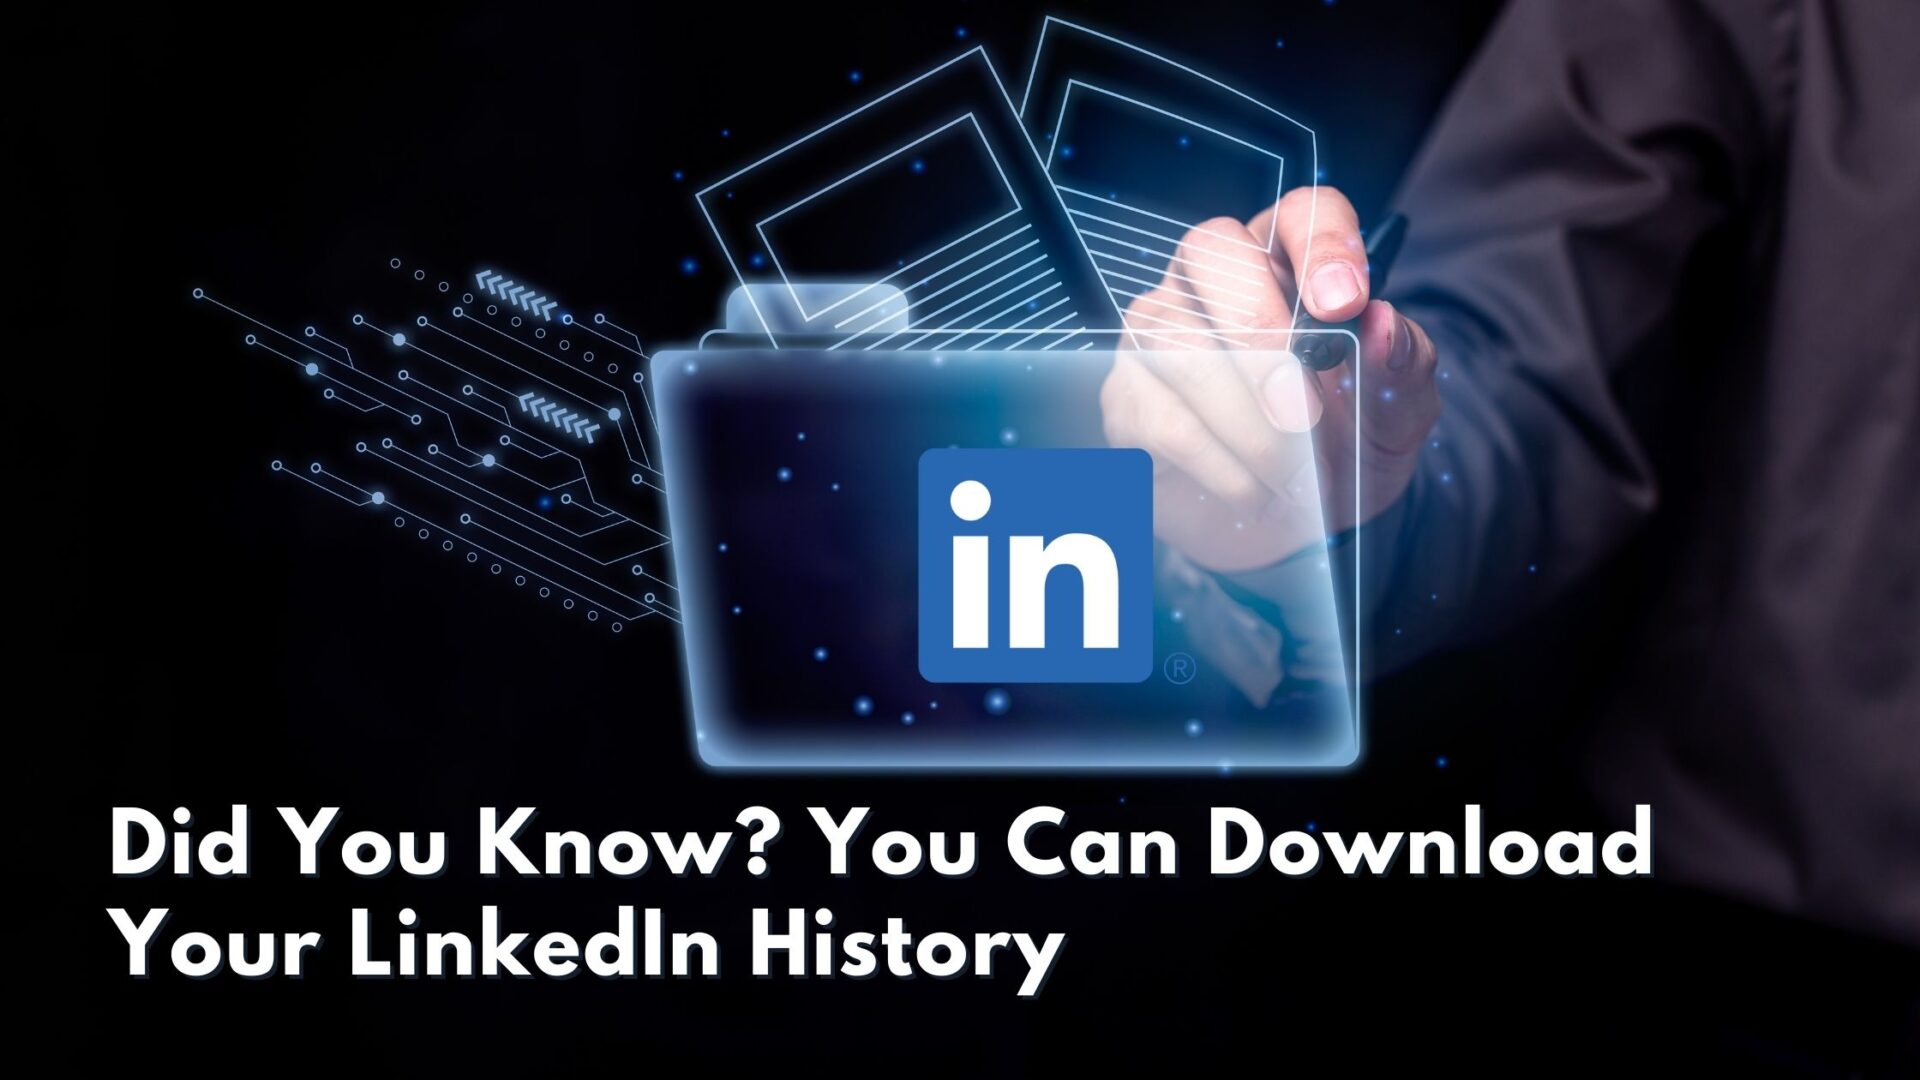 You Can Download Your LinkedIn History cover image